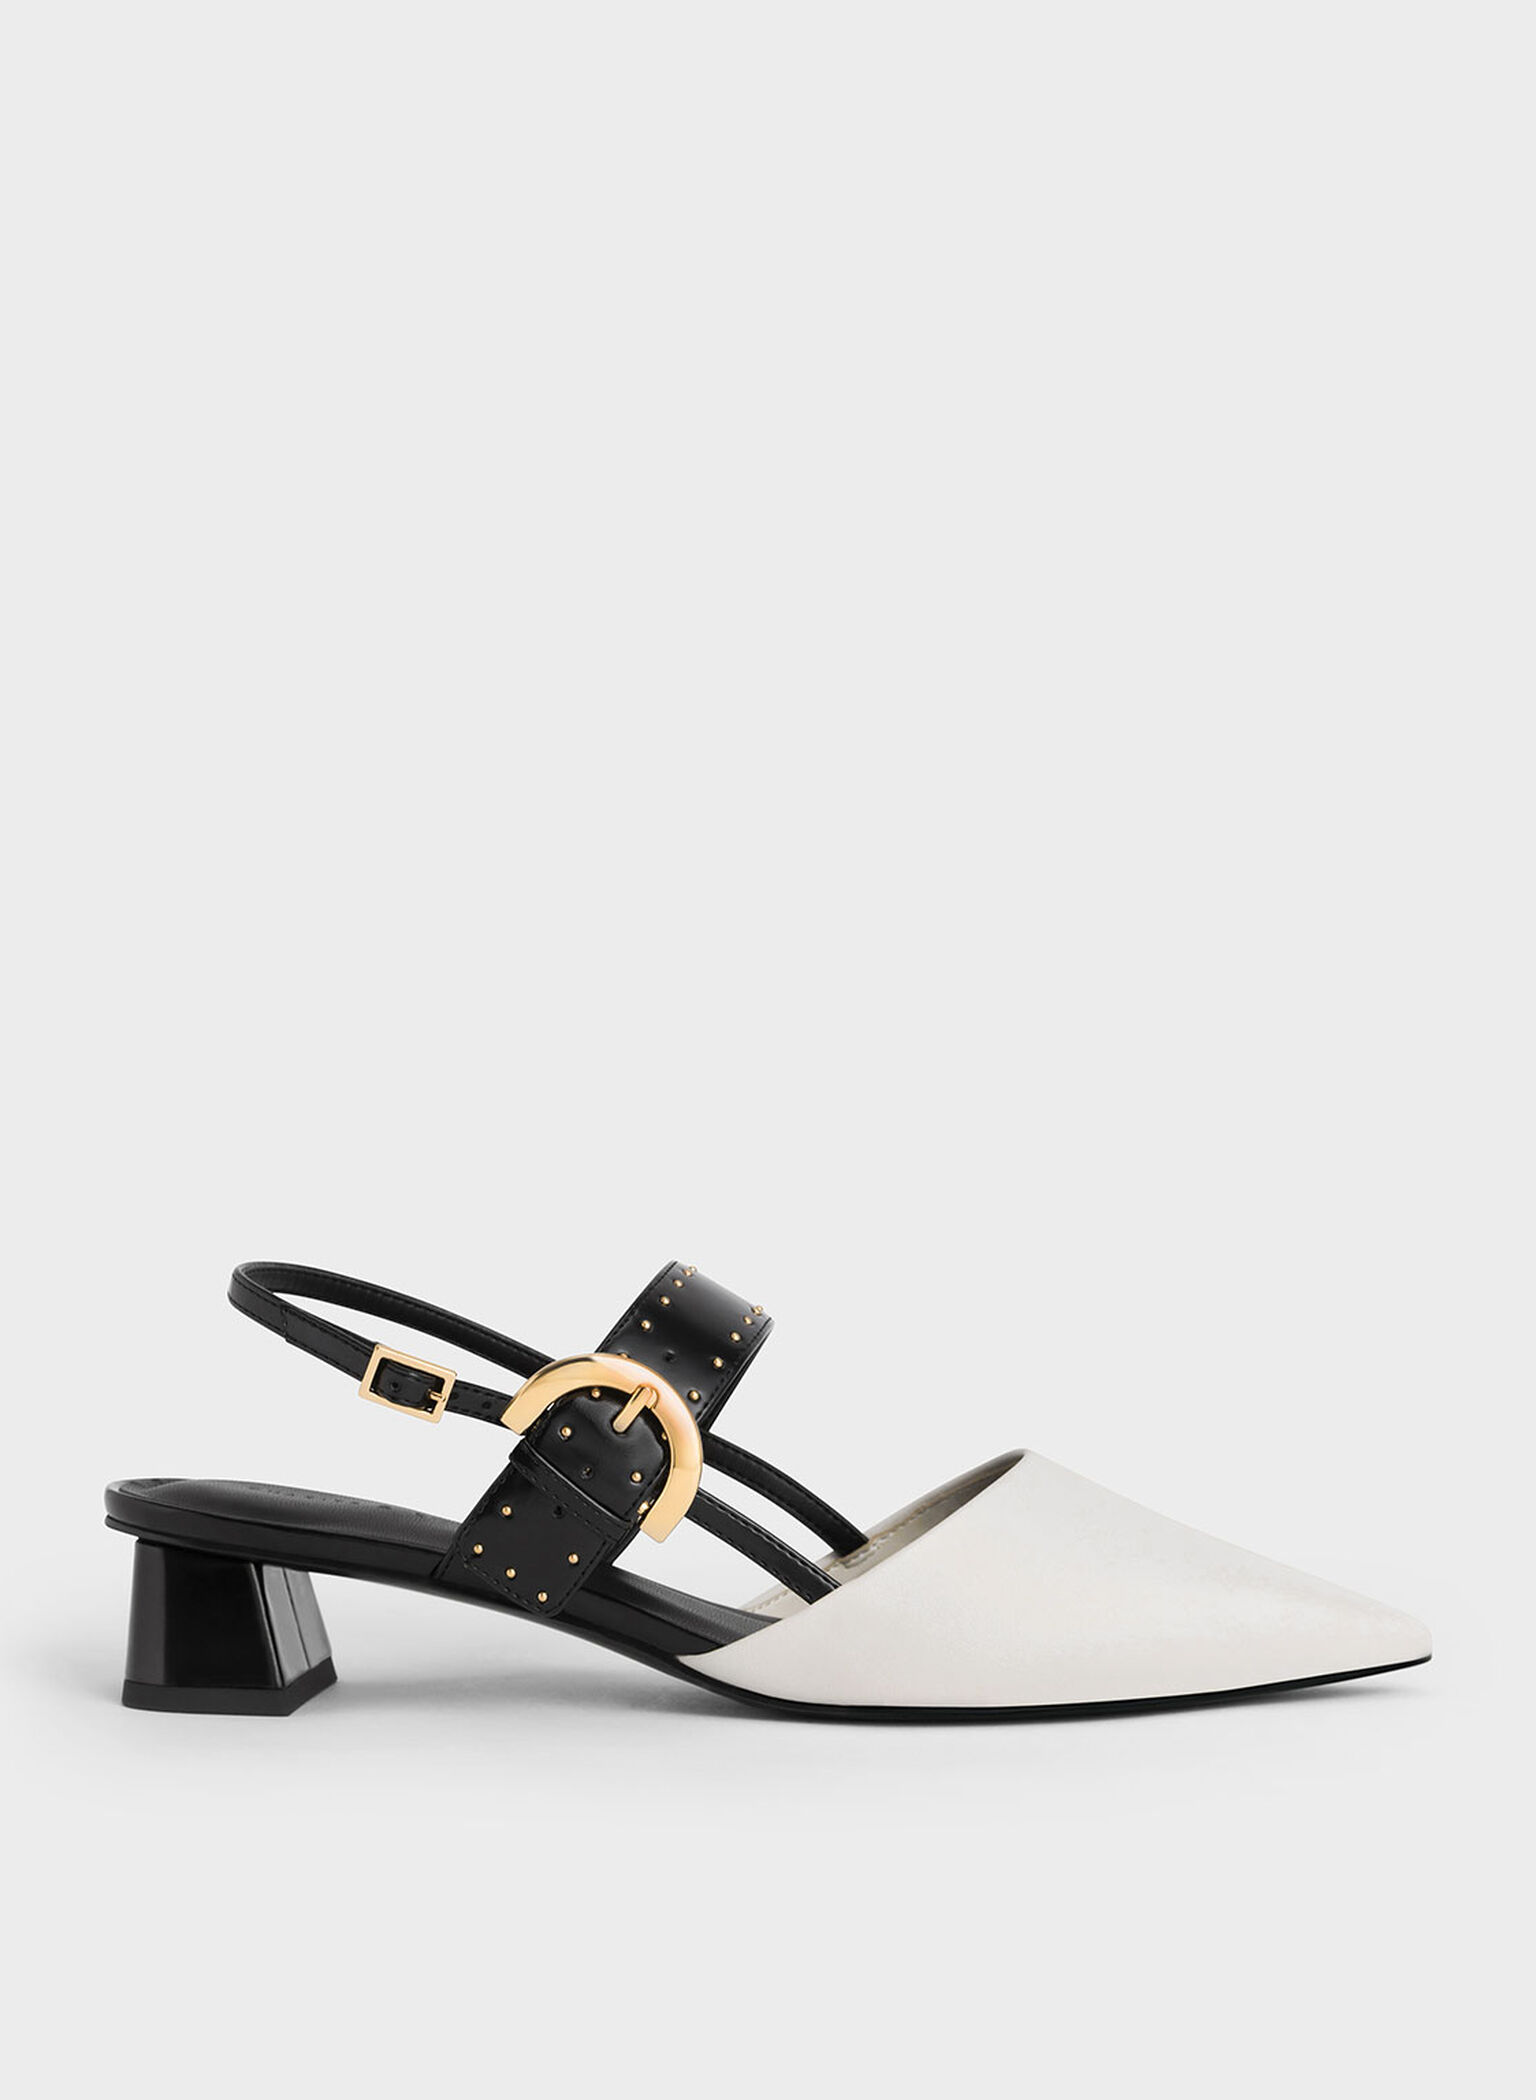 Chalk Studded Buckled Slingback Pumps - CHARLES & KEITH US